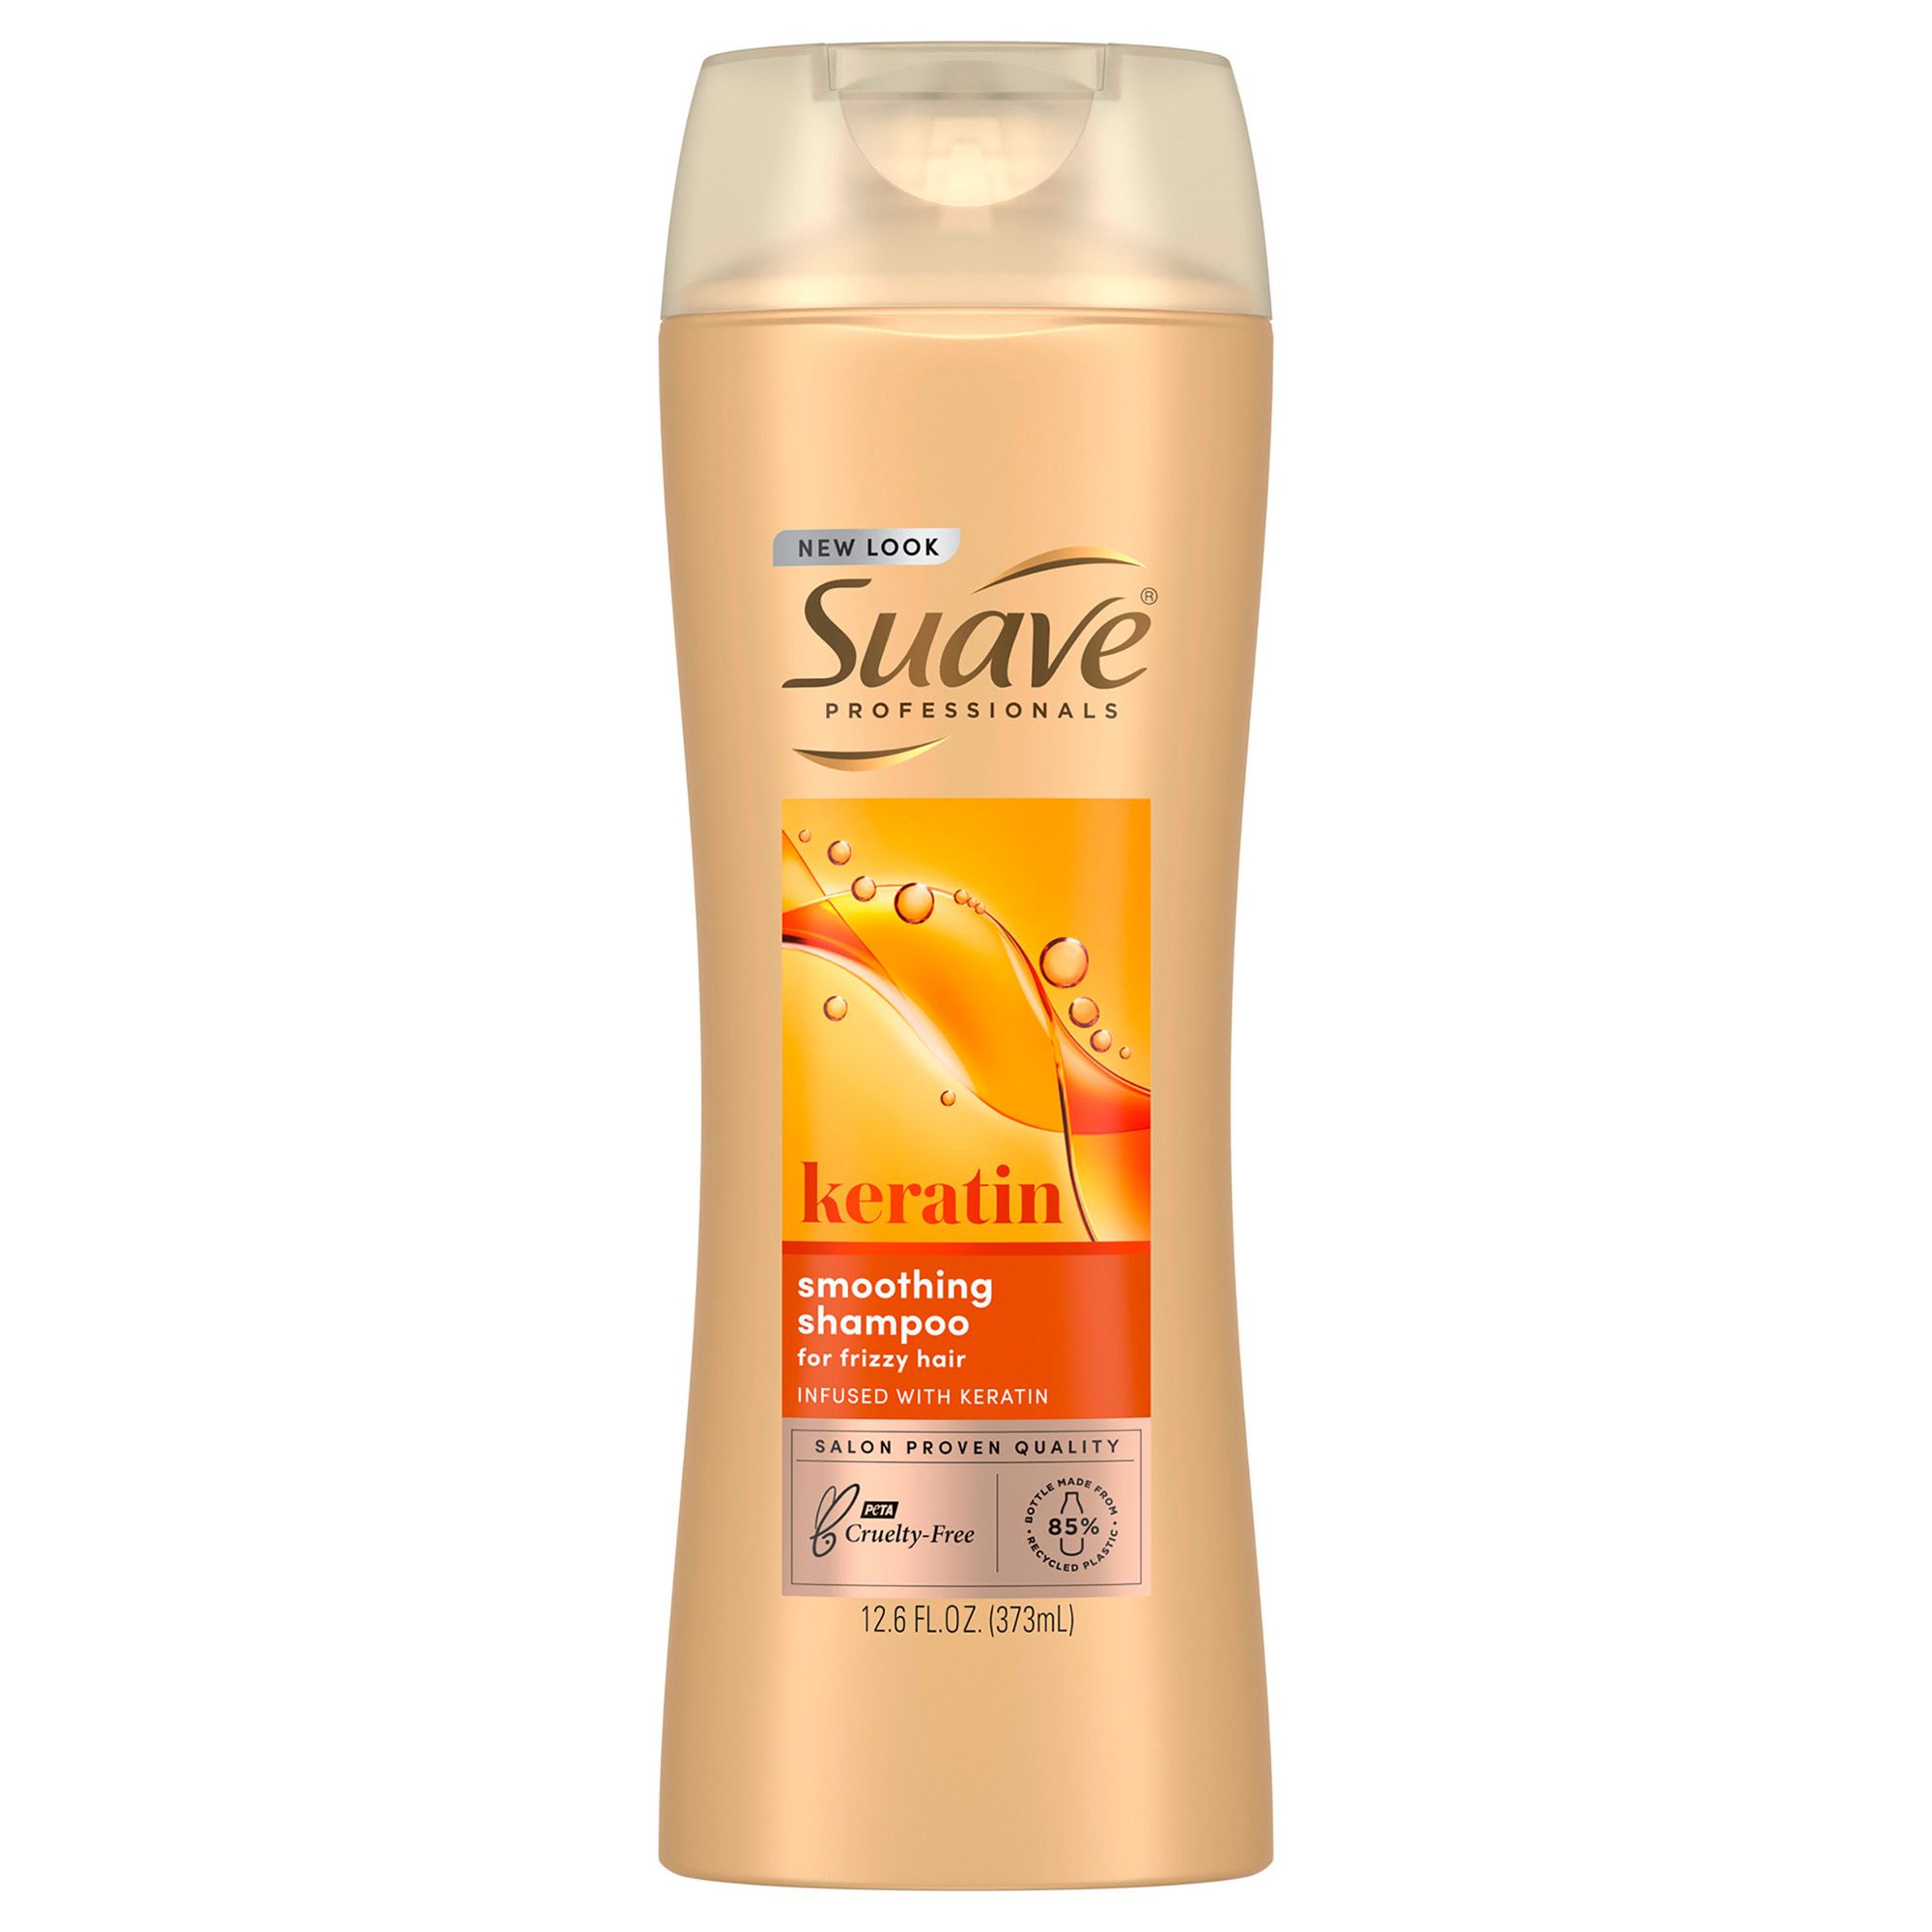 Suave Professionals Smoothing Shampoo and Conditioner, Keratin Infusion, 12.6 Oz, Twin Pack - image 3 of 7